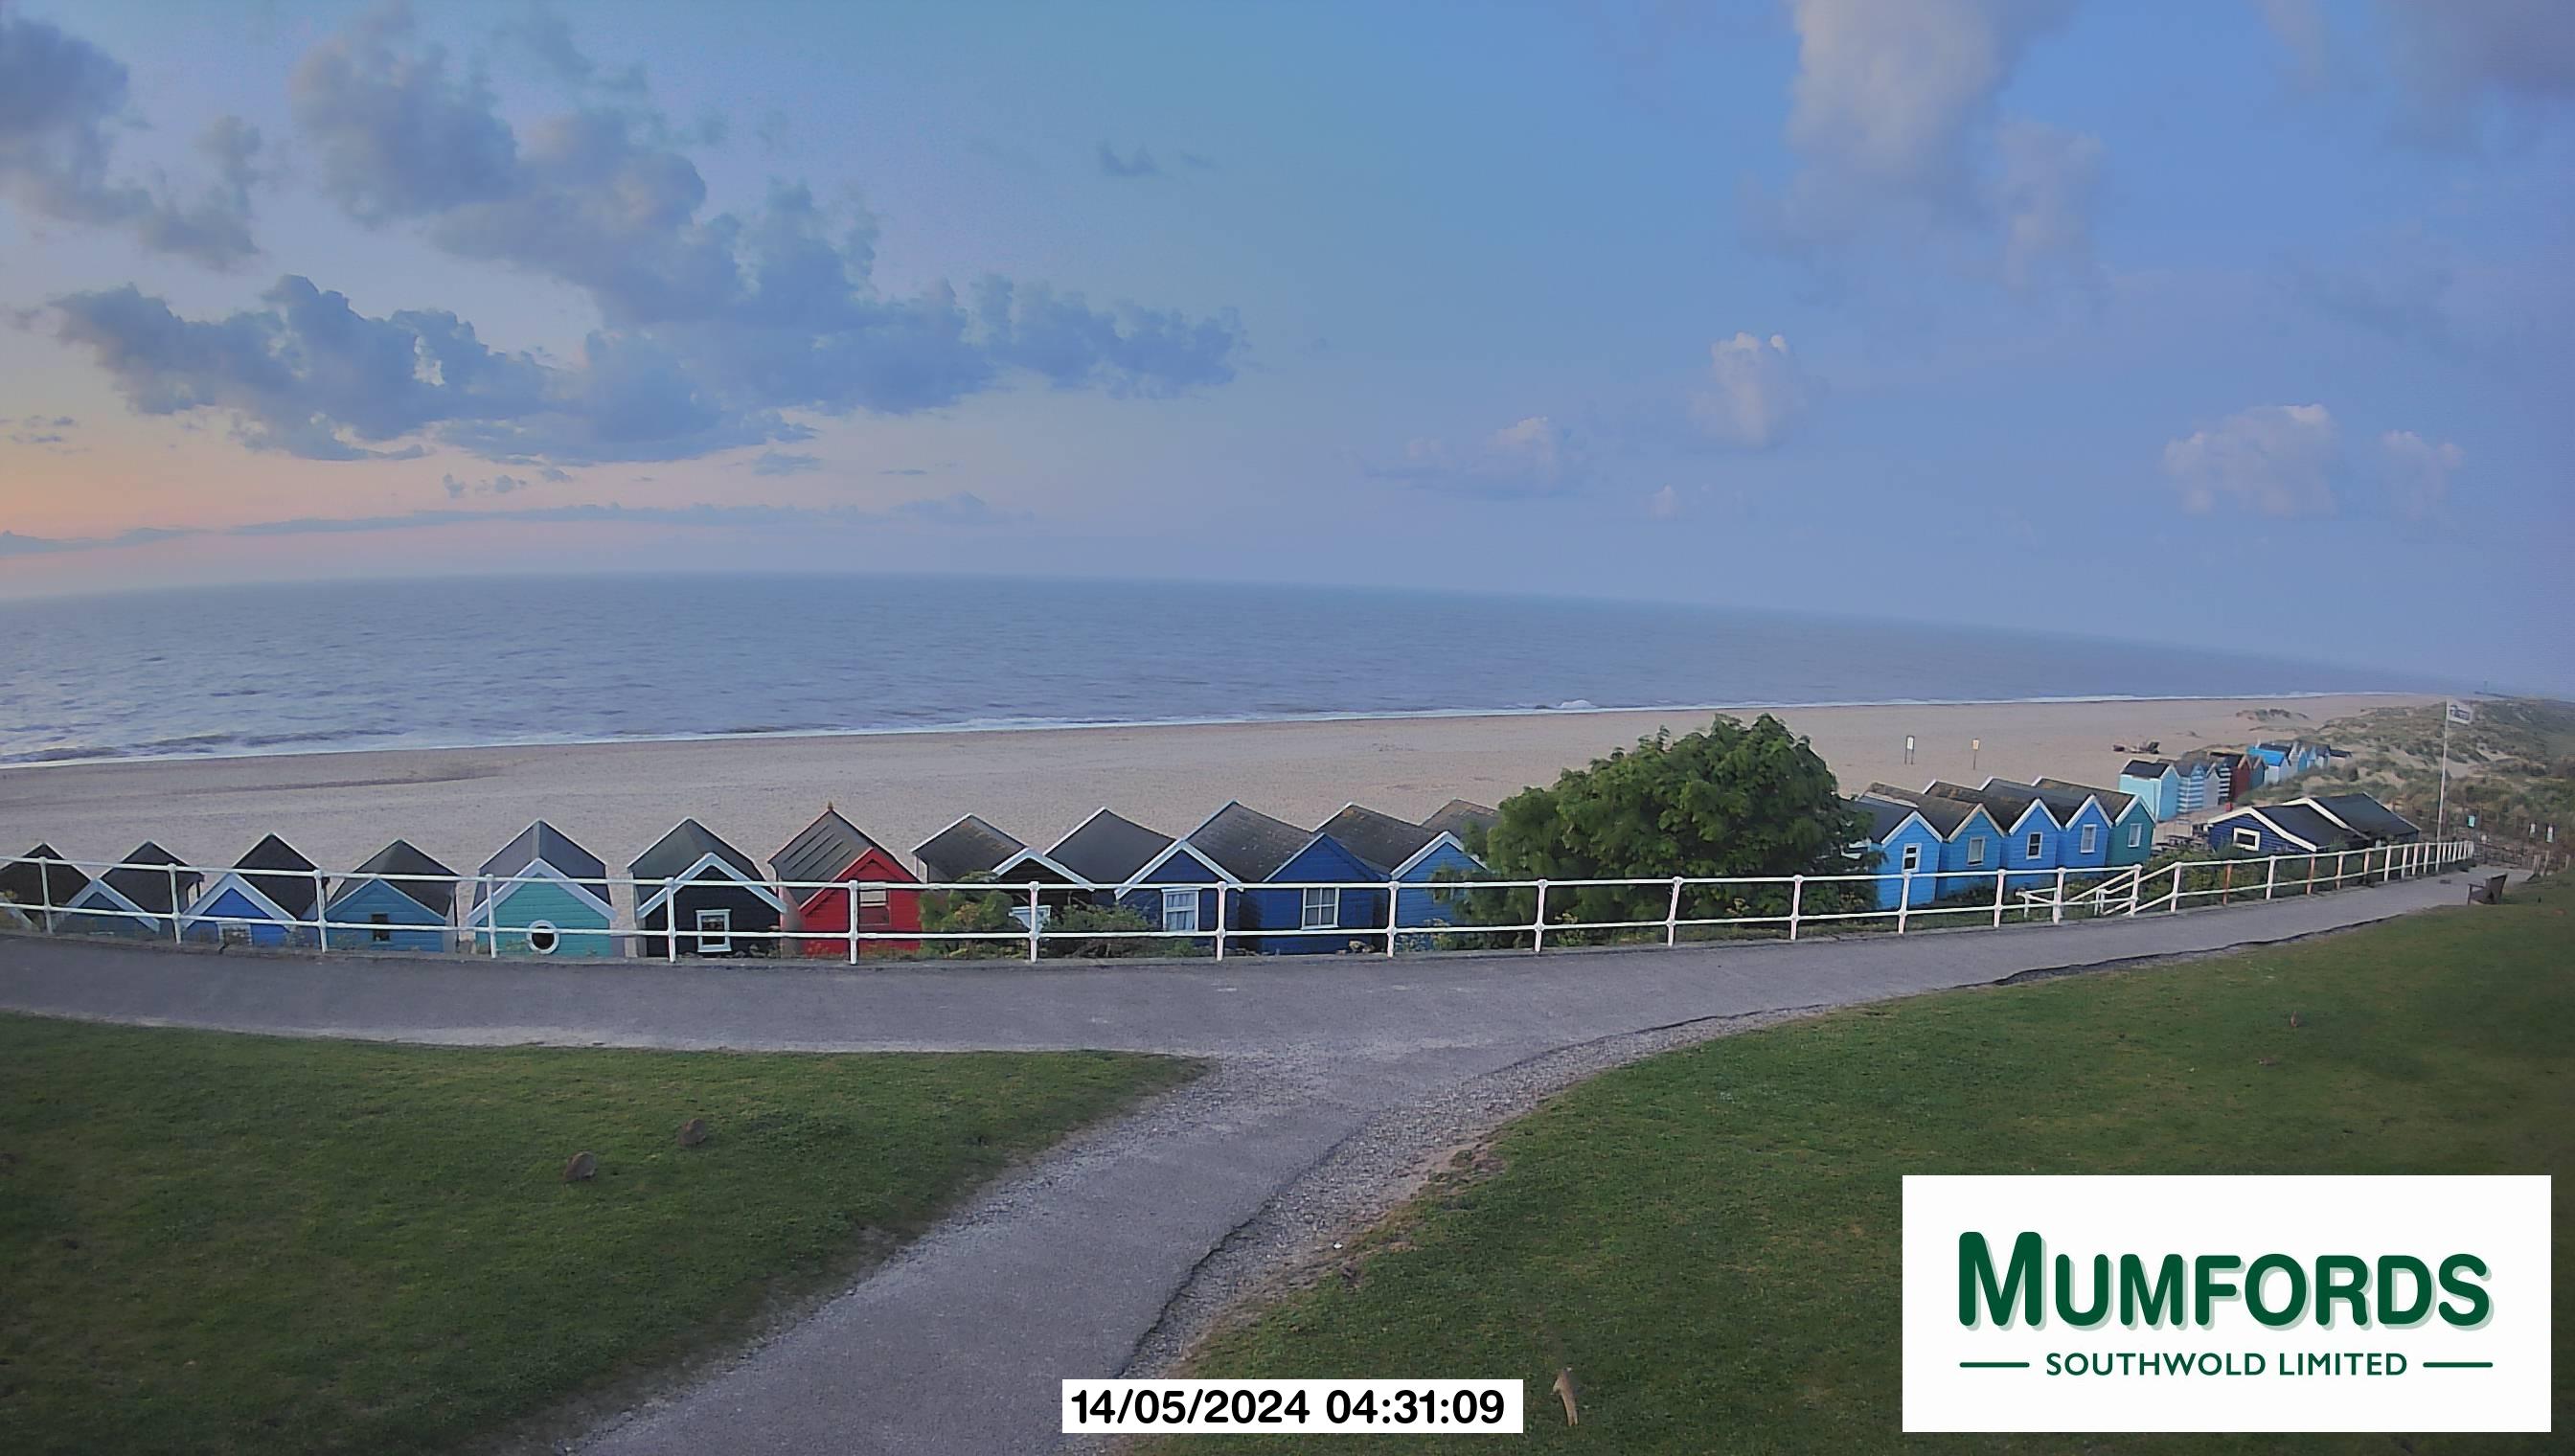 Webcam of Southwold beach and the sea right now!